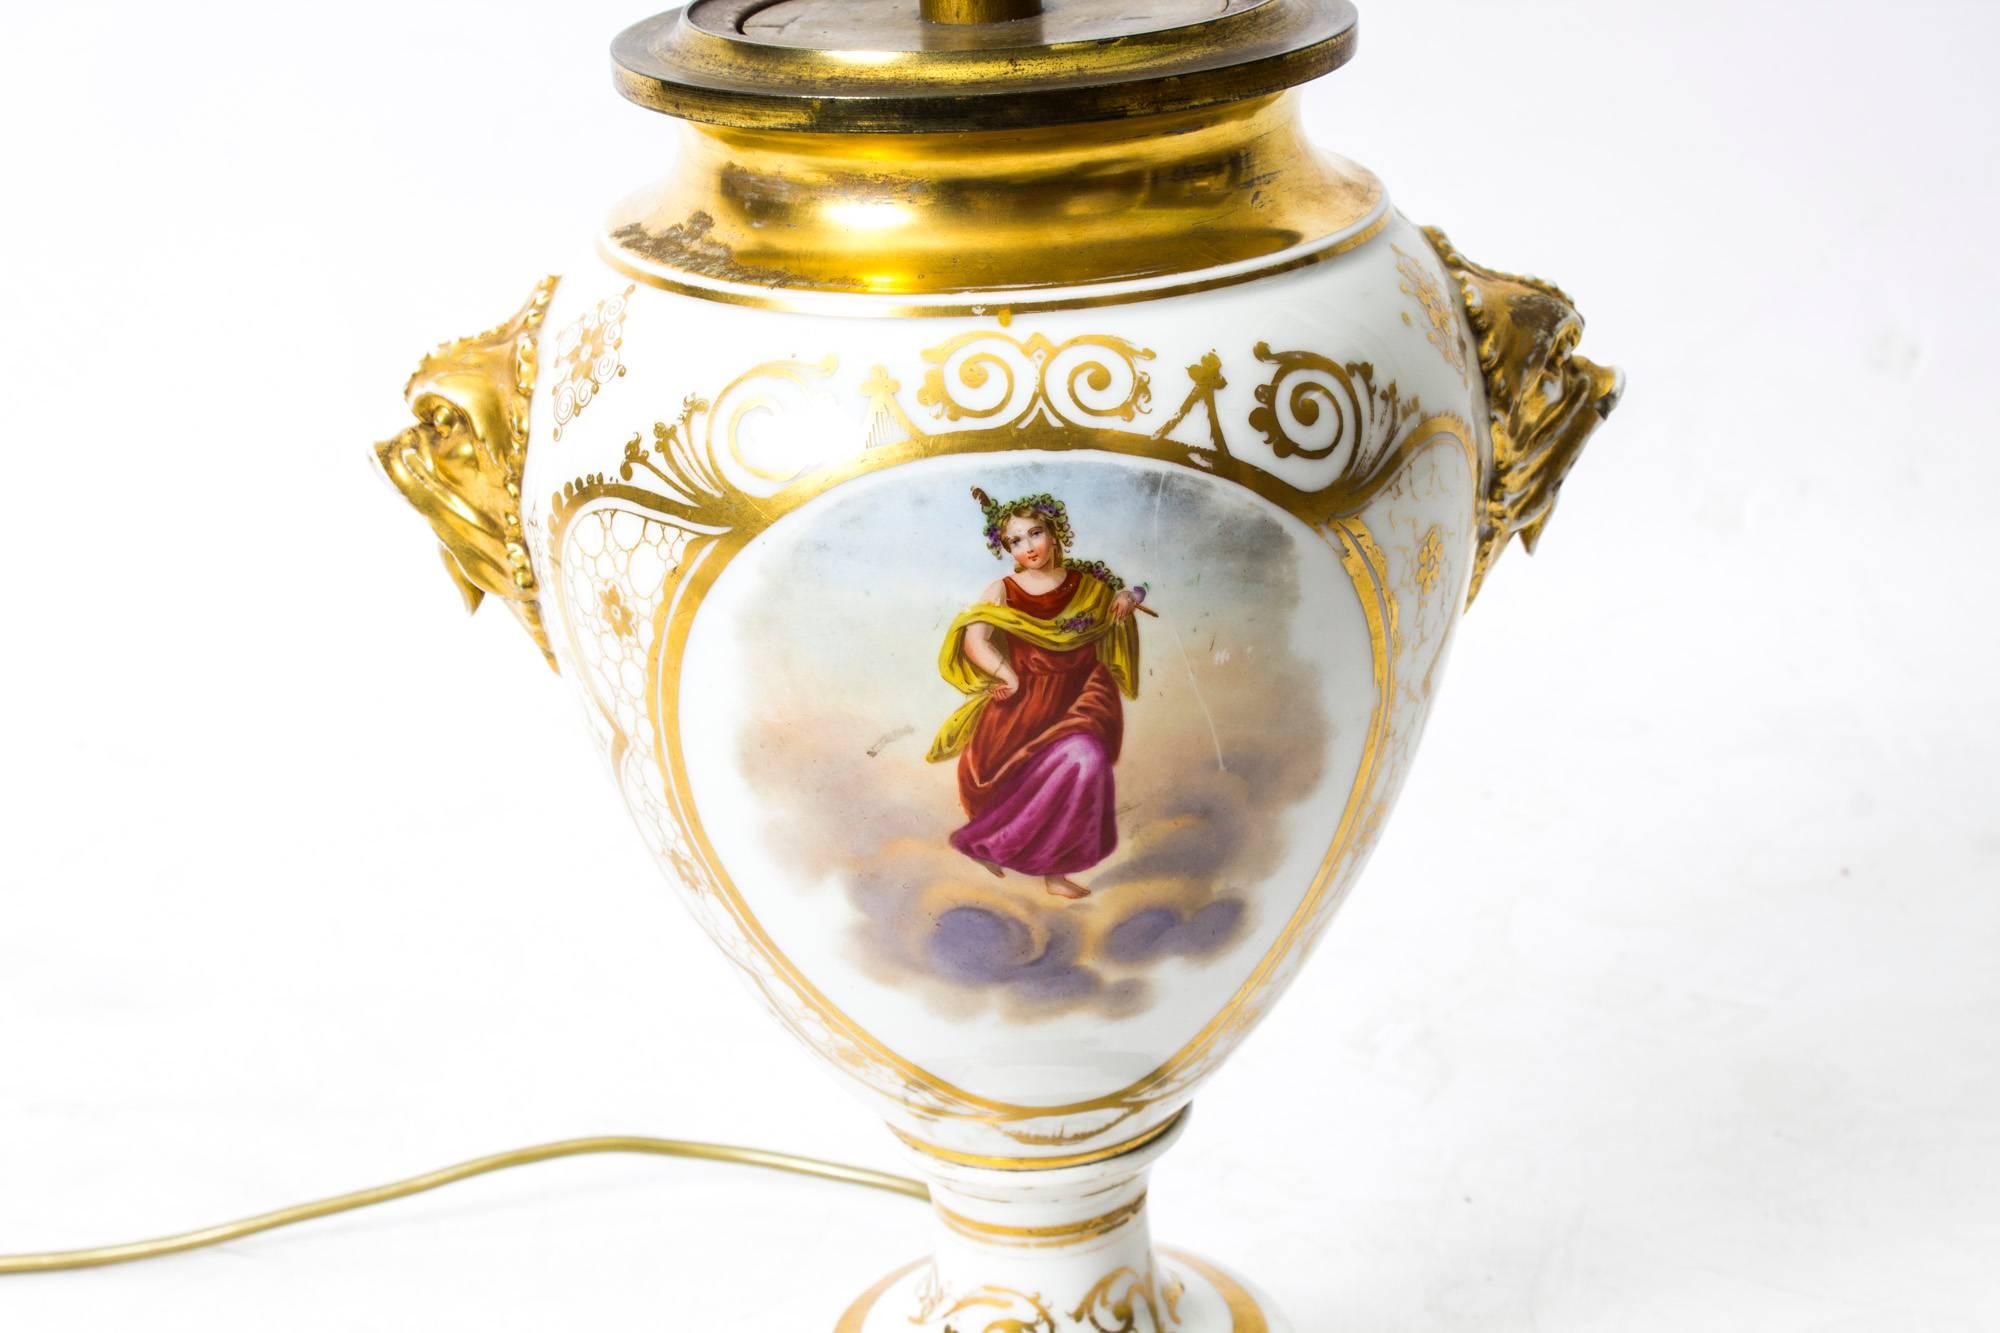 A beautiful French porcelain lamp with hand-painted scenes and delicate gilt decoration, dating from 1850. 

The lamp features a pair of oval panels, one with a hand-painted classical deity in the clouds and the other painted with wild flowers, each